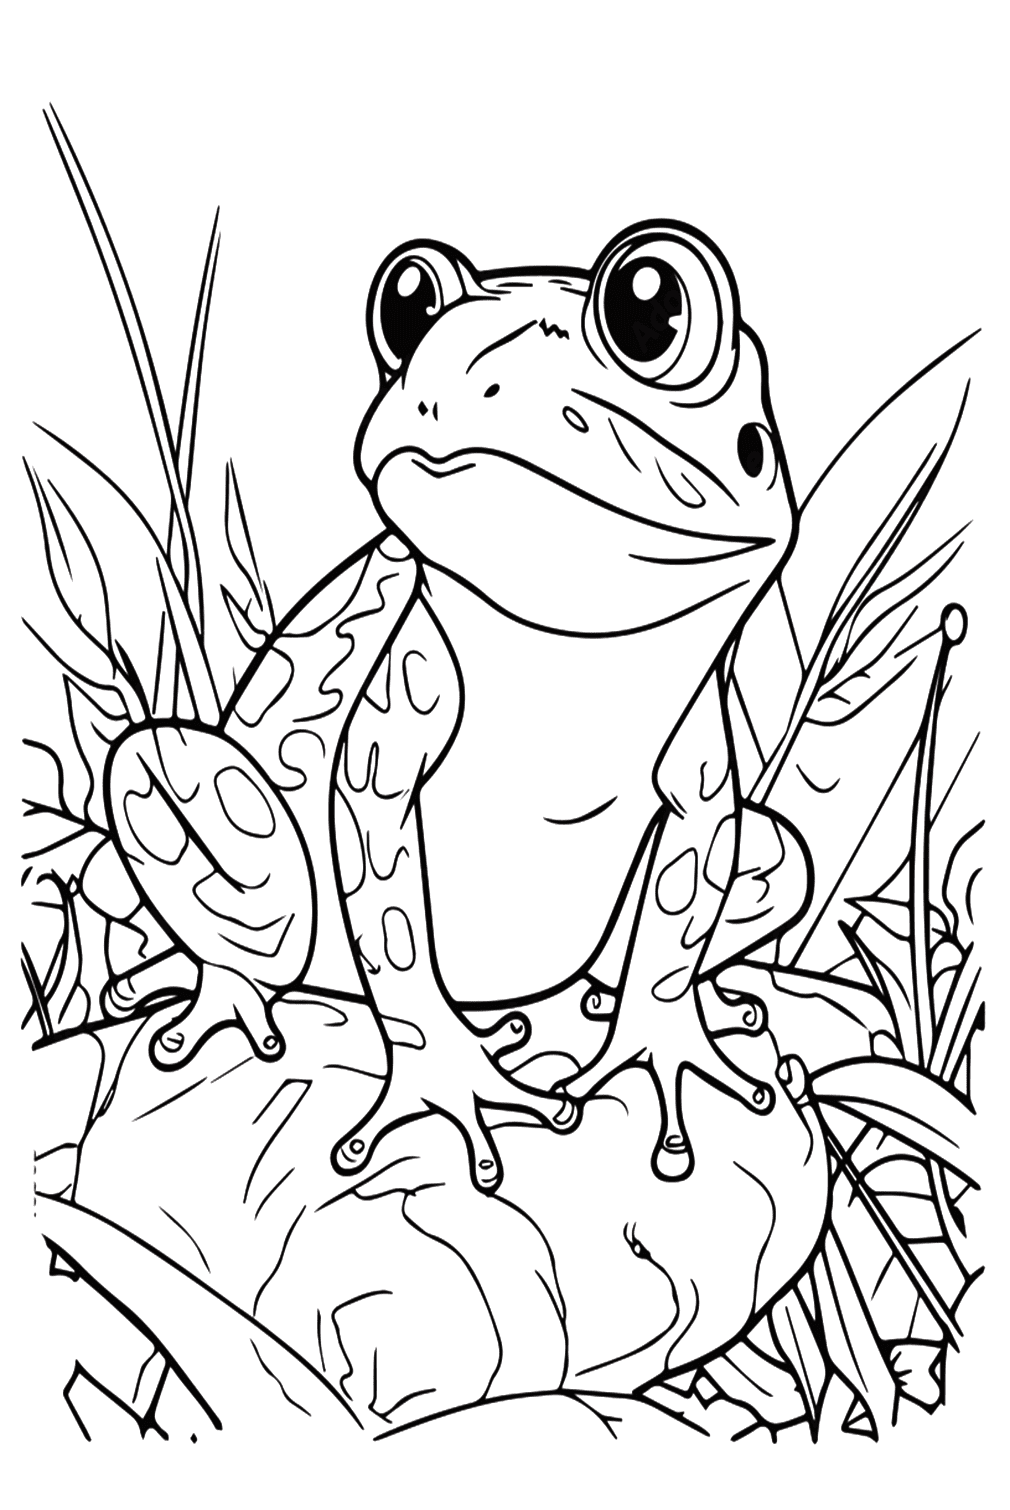 Cane Toad Picture To Color from Cane Toad